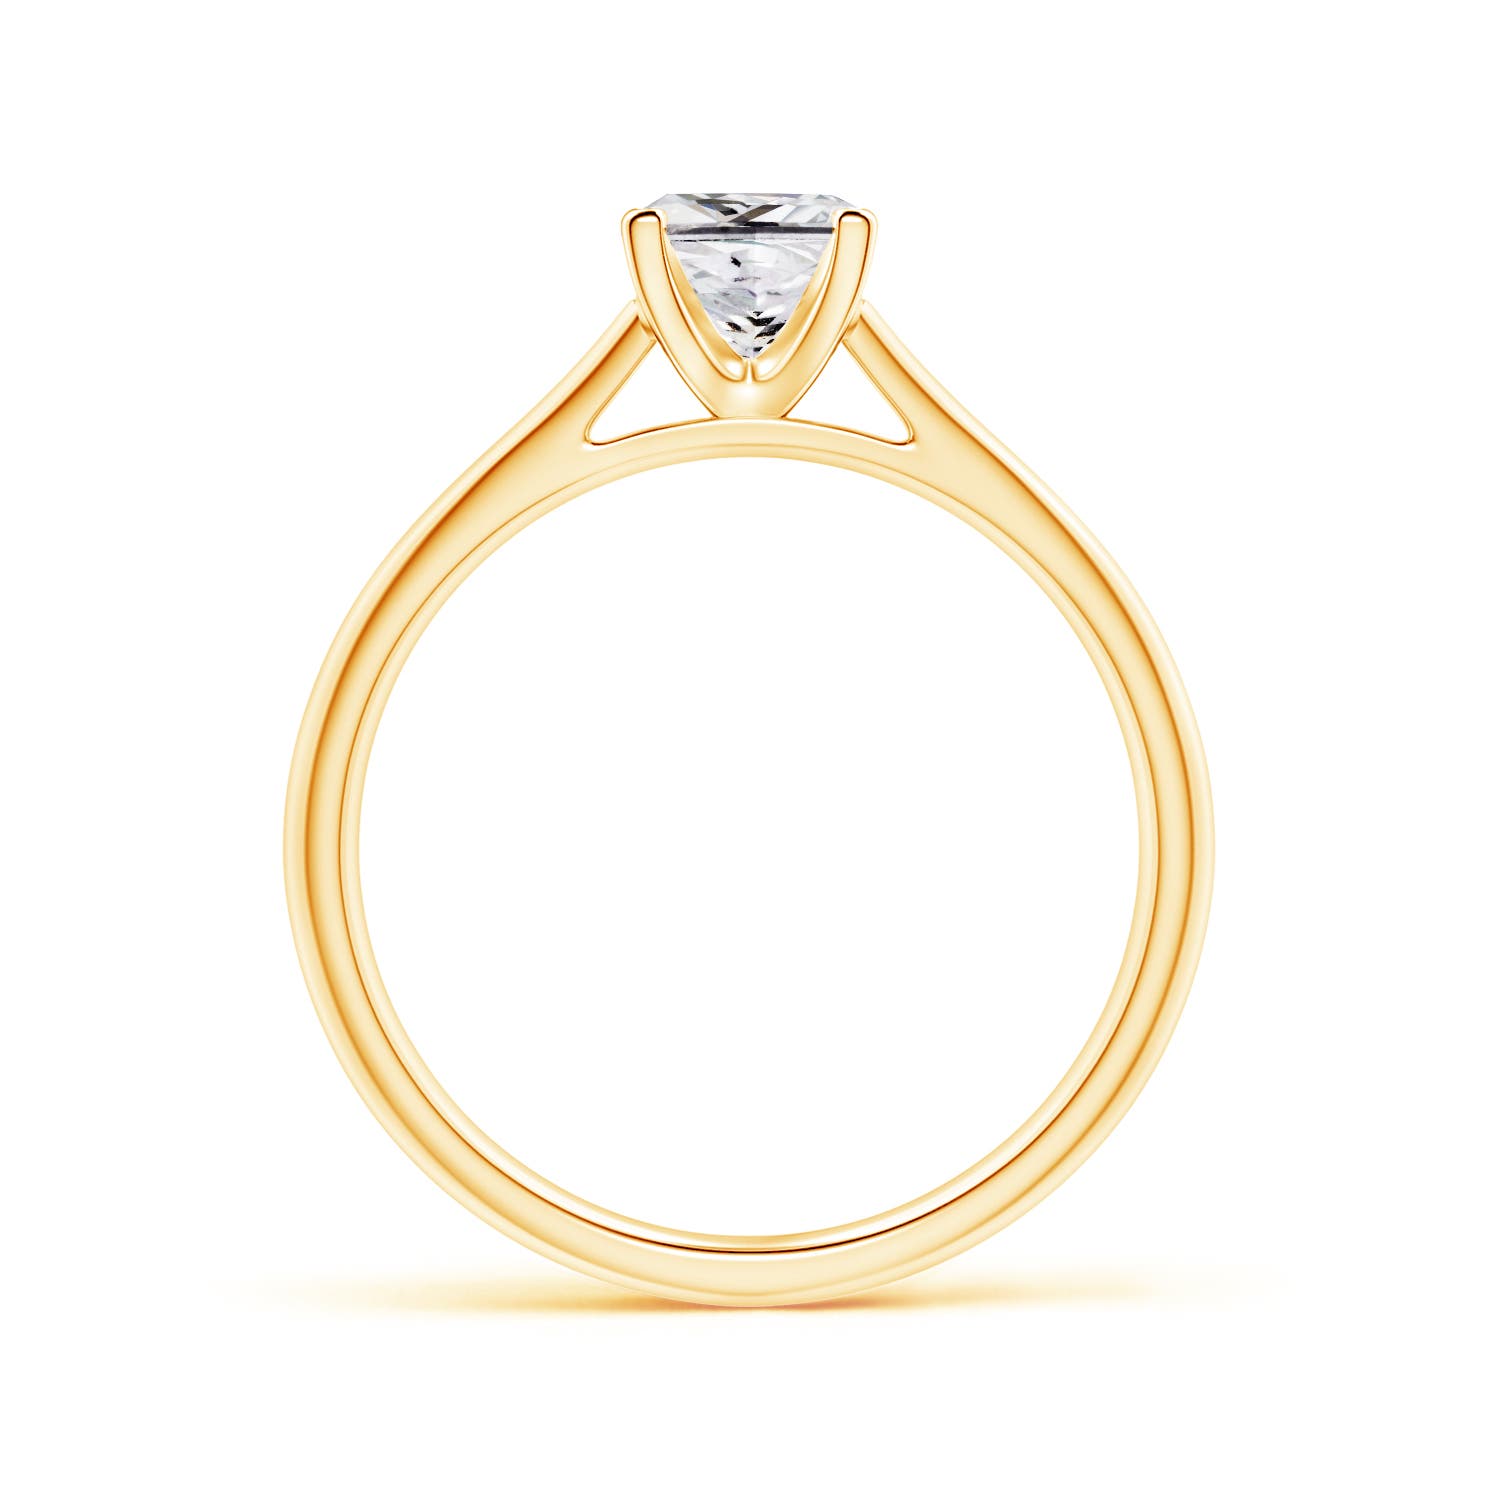 H, SI2 / 0.75 CT / 14 KT Yellow Gold